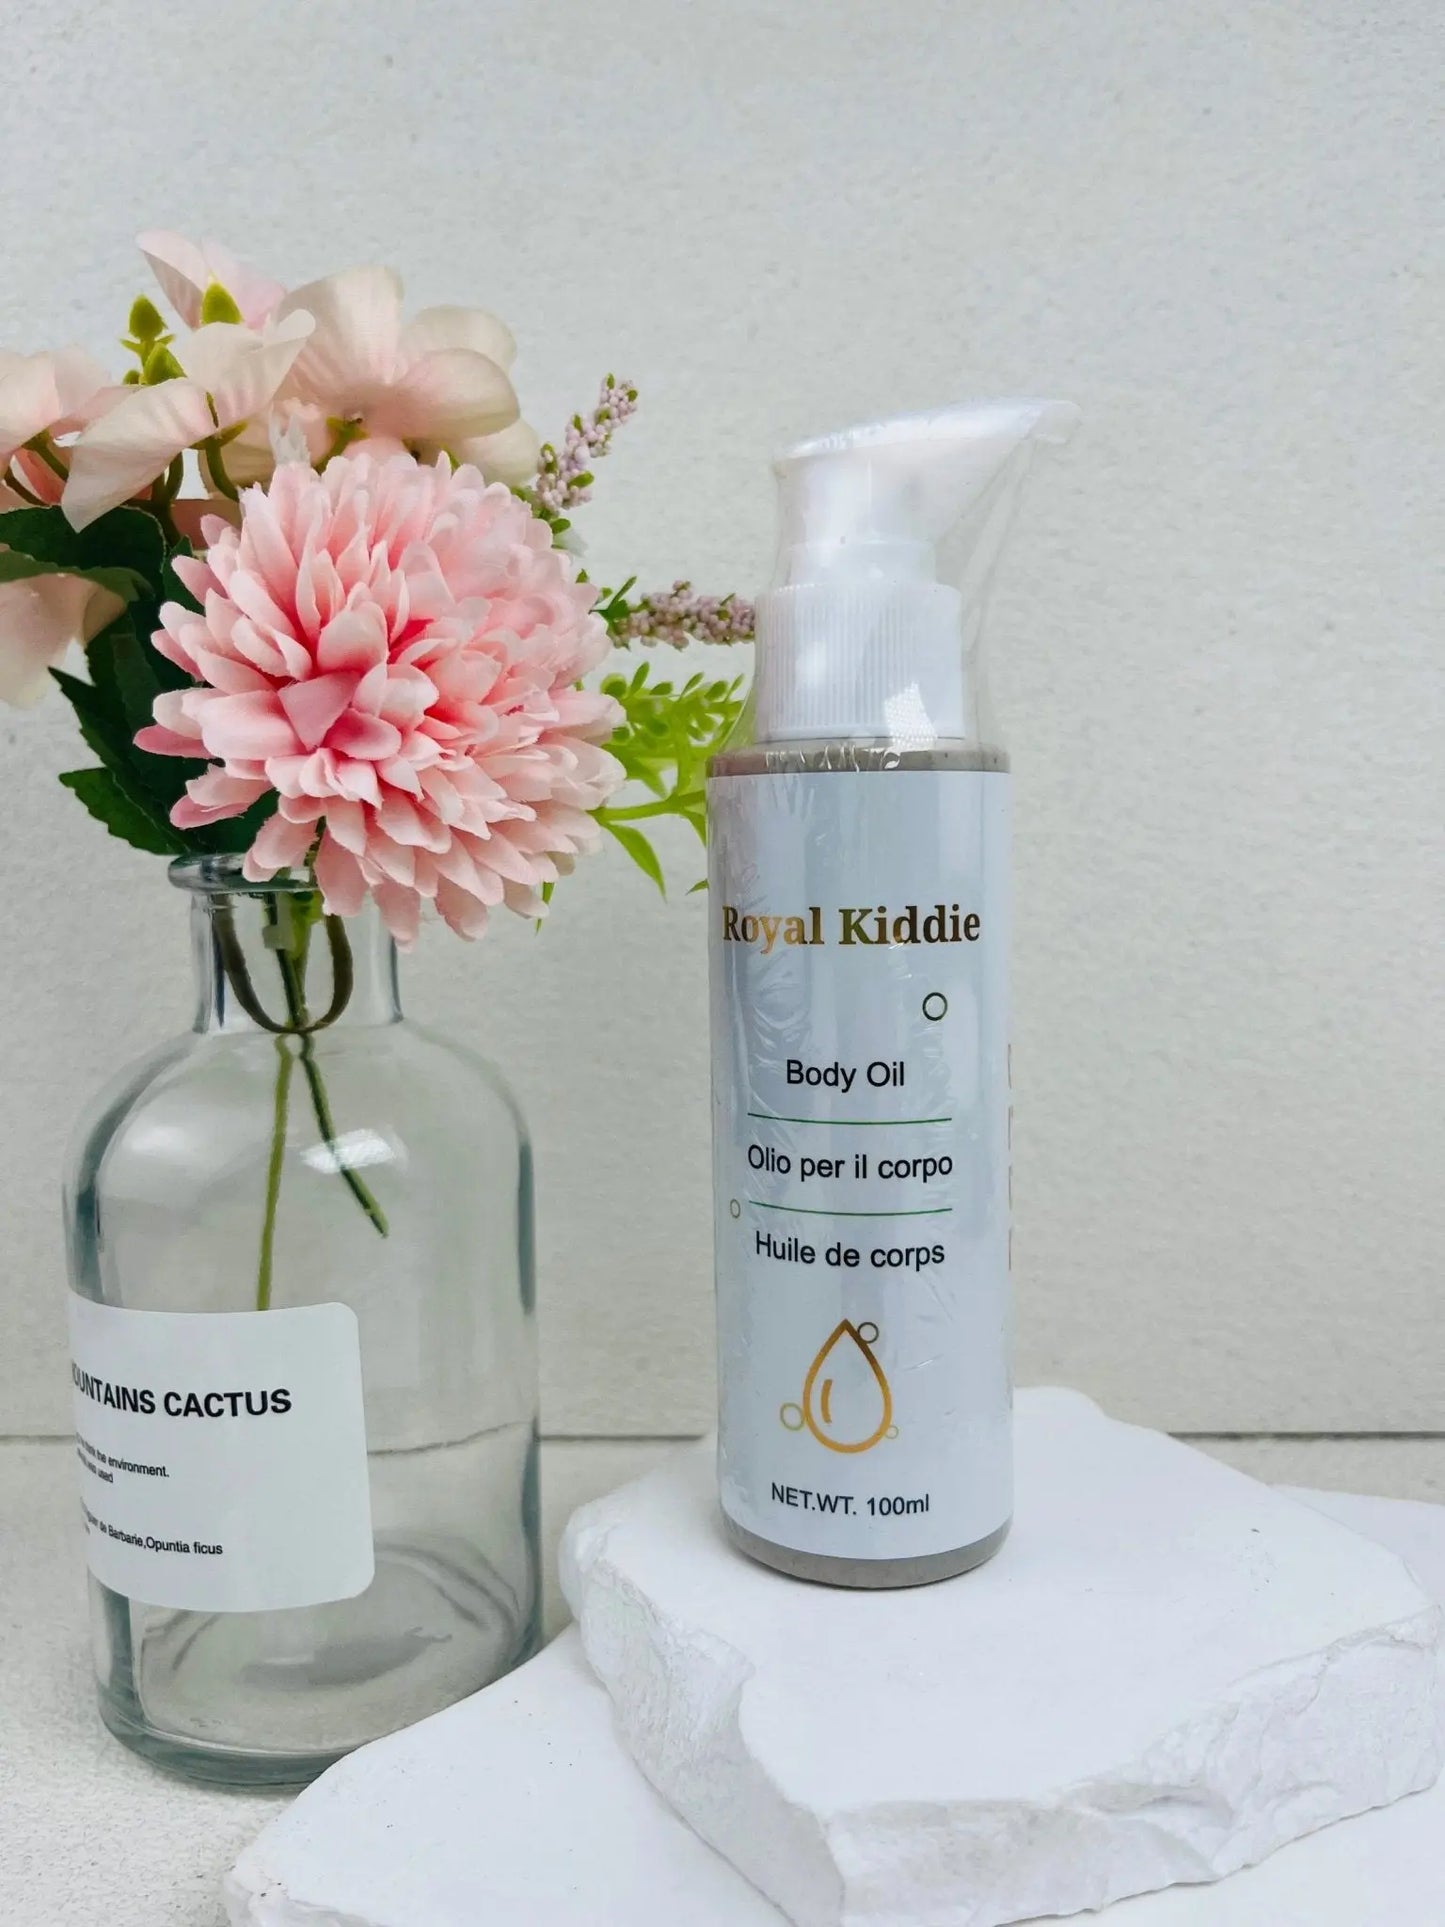  Body oil for Kid - Vicsflawless